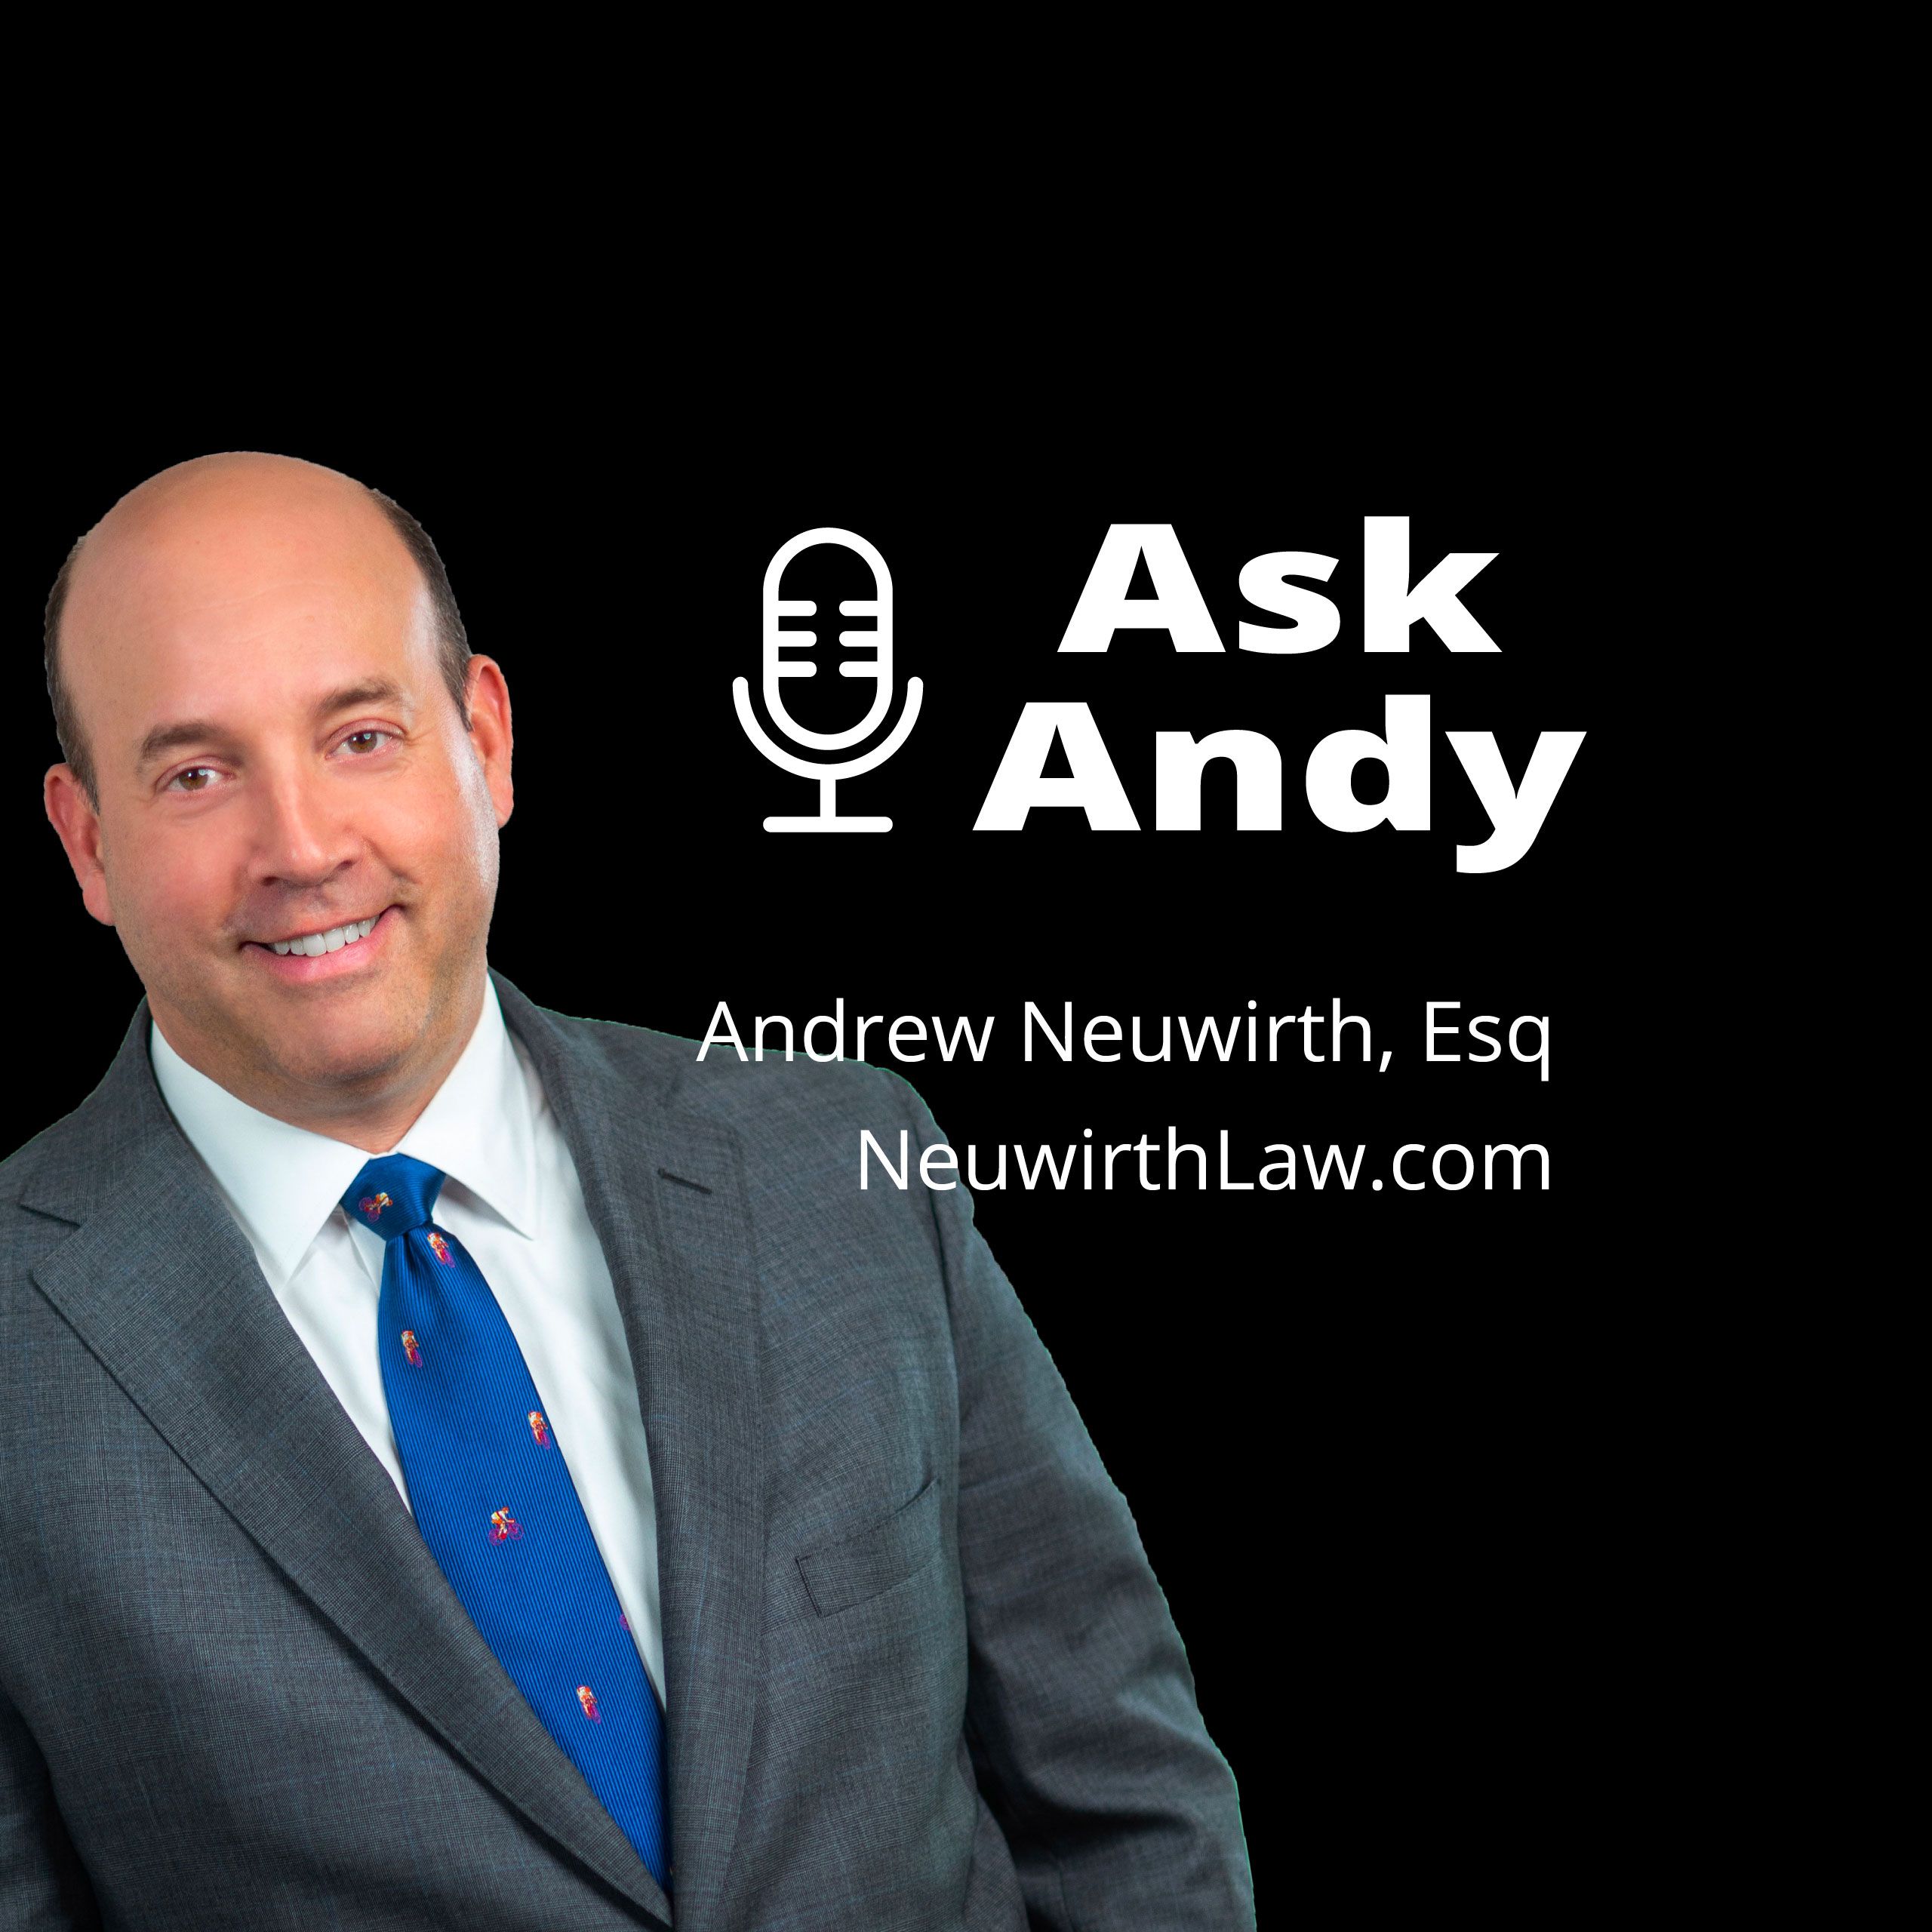 Ask Andy What Is Involved In Filing A Lawsuit * Ask Andy - Andrew Neuwirth ...